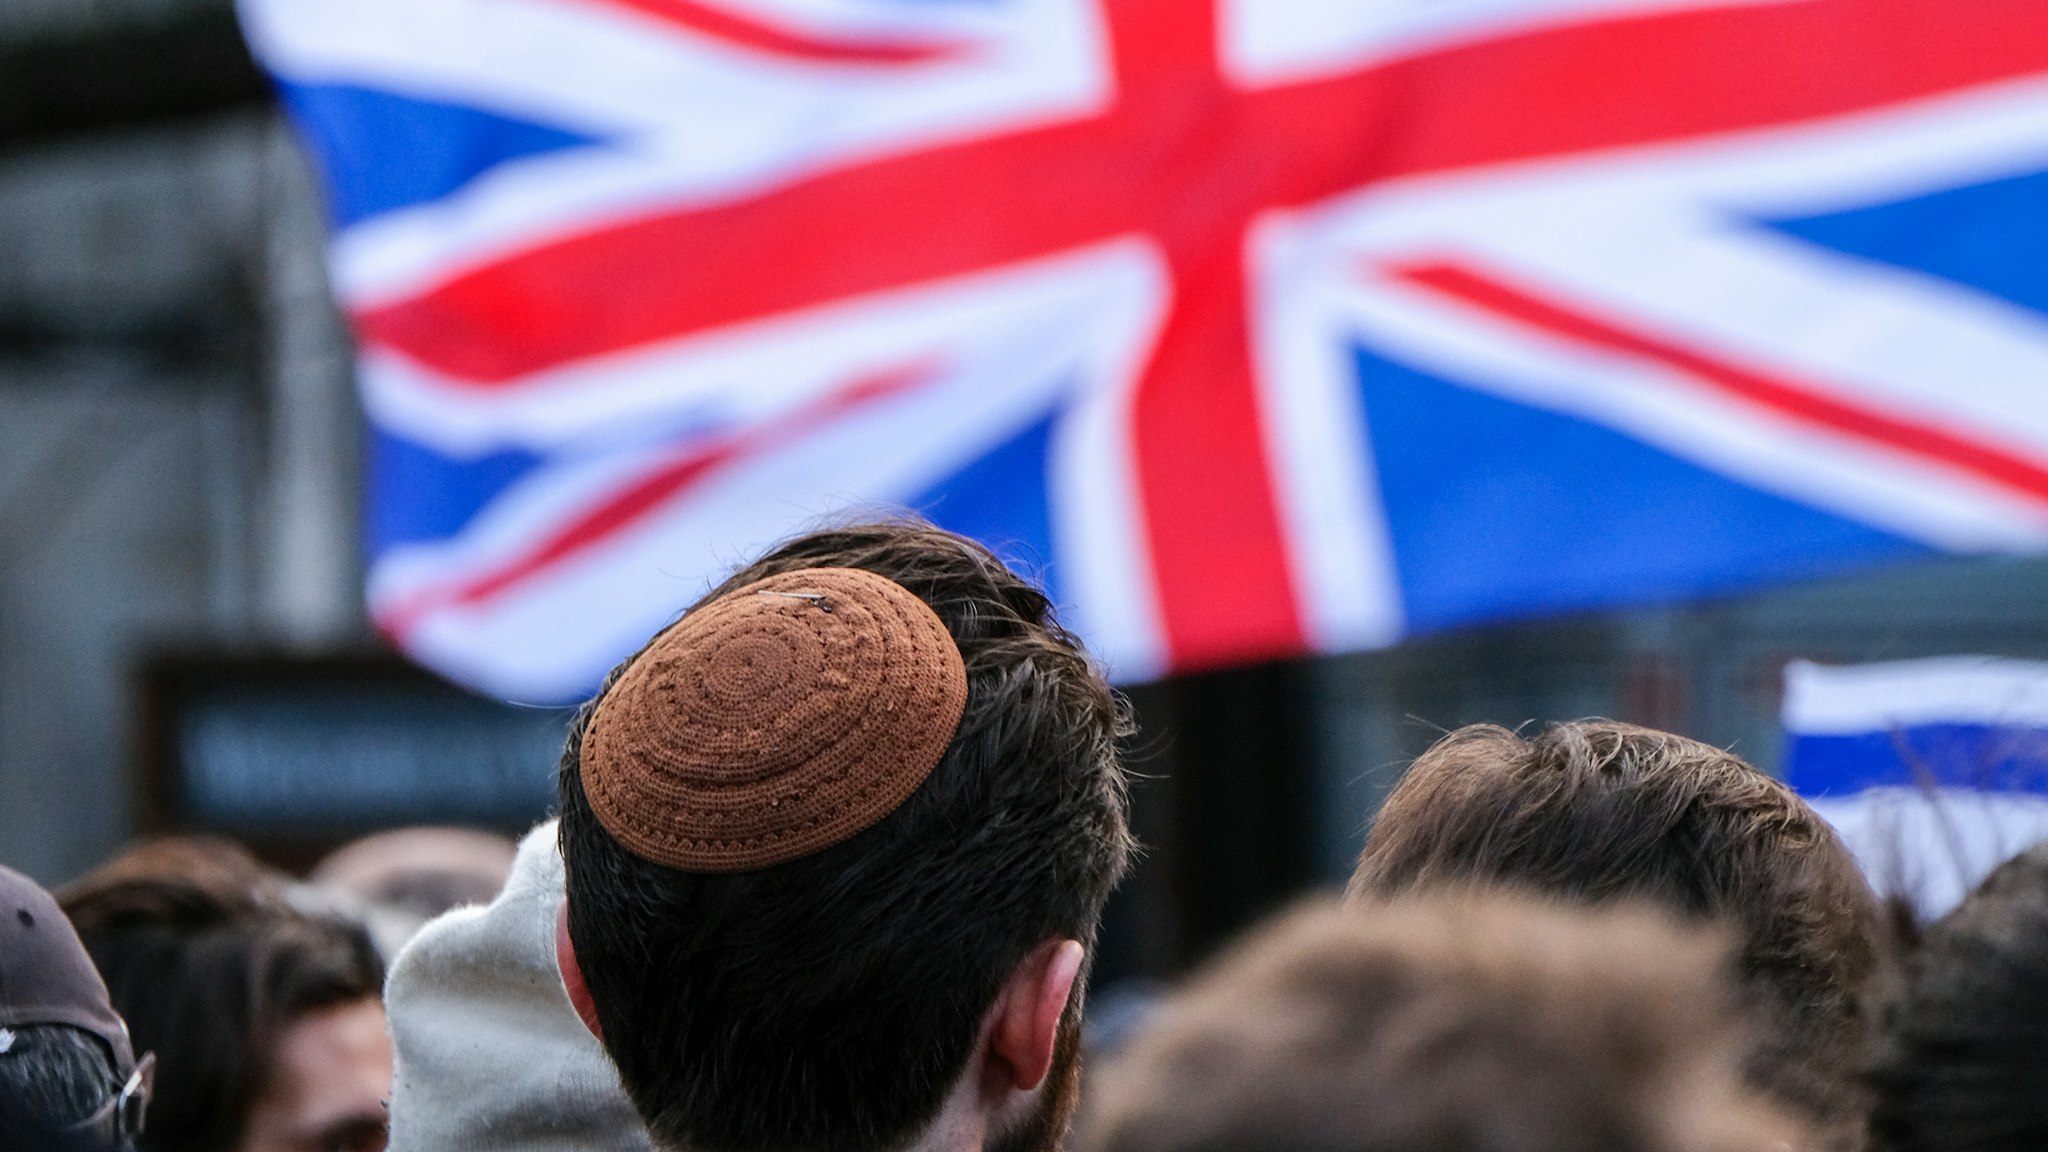 LONDON, UNITED KINGDOM DECEMBER 08, 2019 - People stage a Together Against Antisemitism rally in Parliament Square- PHOTOGRAPH BY Matthew Chattle / Barcroft Media (Photo credit should read Matthew Chattle / Barcroft Media via Getty Images)